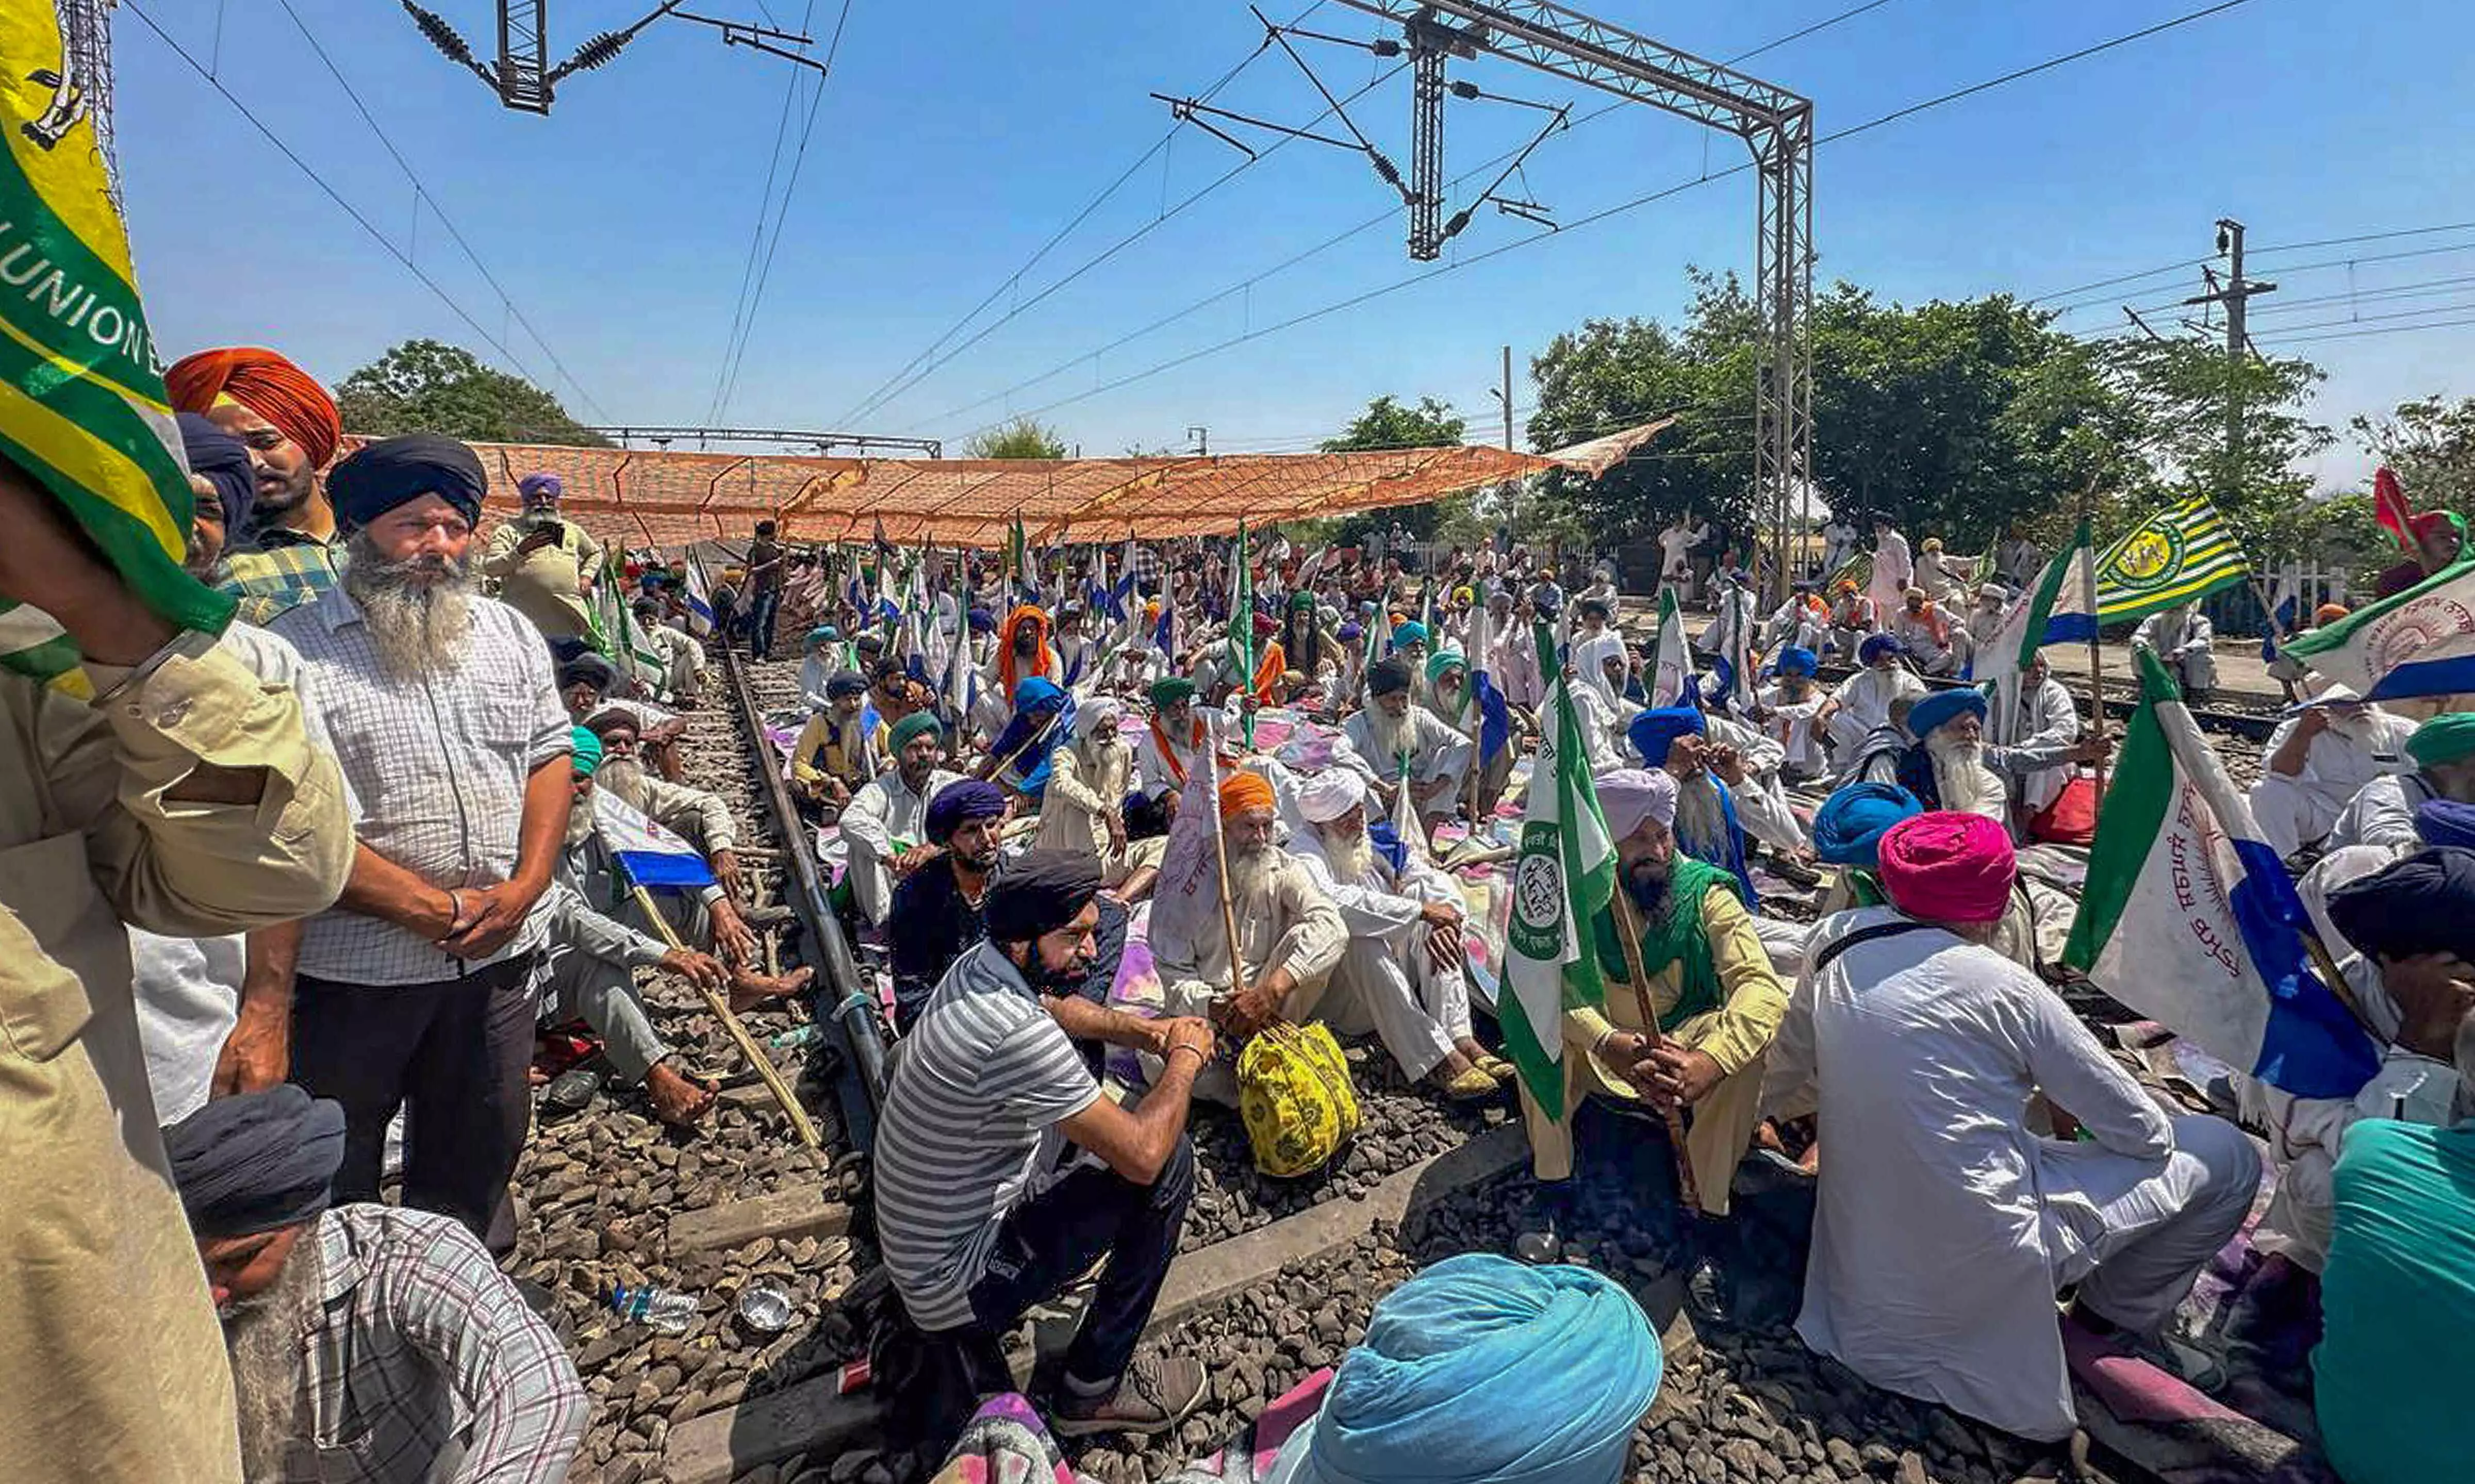 Several trains affected as farmers squat on track demanding release of fellow protesters